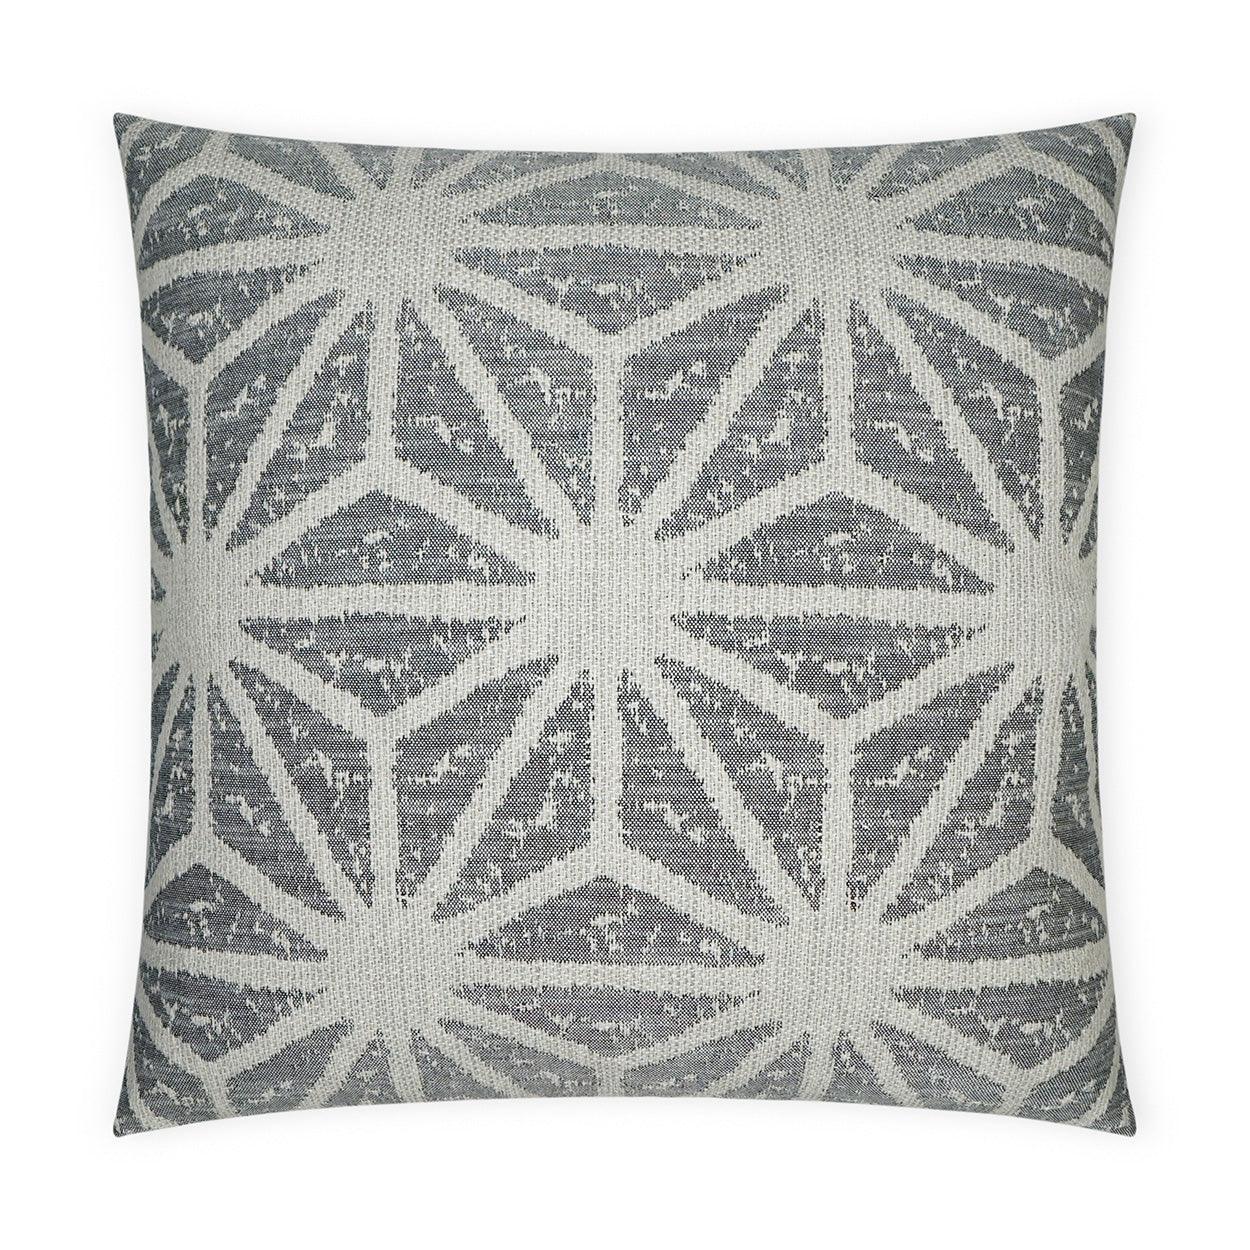 Solazzo Charcoal Geometrical Grey Tan Taupe Large Throw Pillow With Insert - Uptown Sebastian